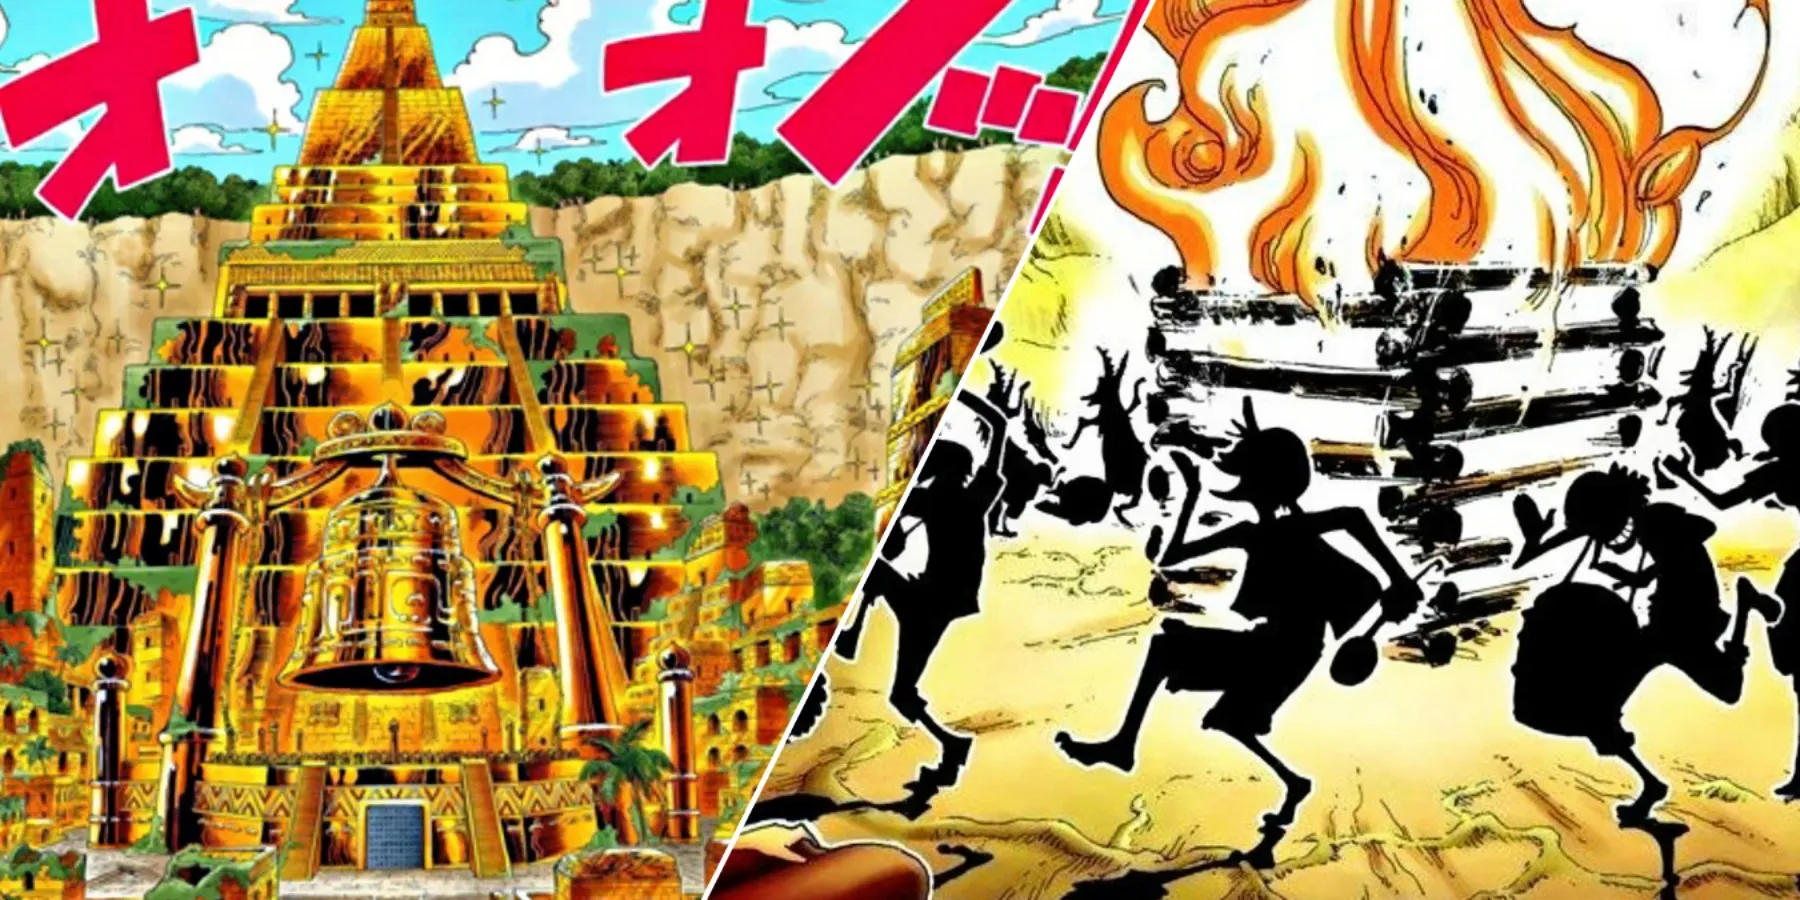 How One Piece's Skypiea Arc is Making a Comeback: Why Fans Are Revisiting this Underrated Classic